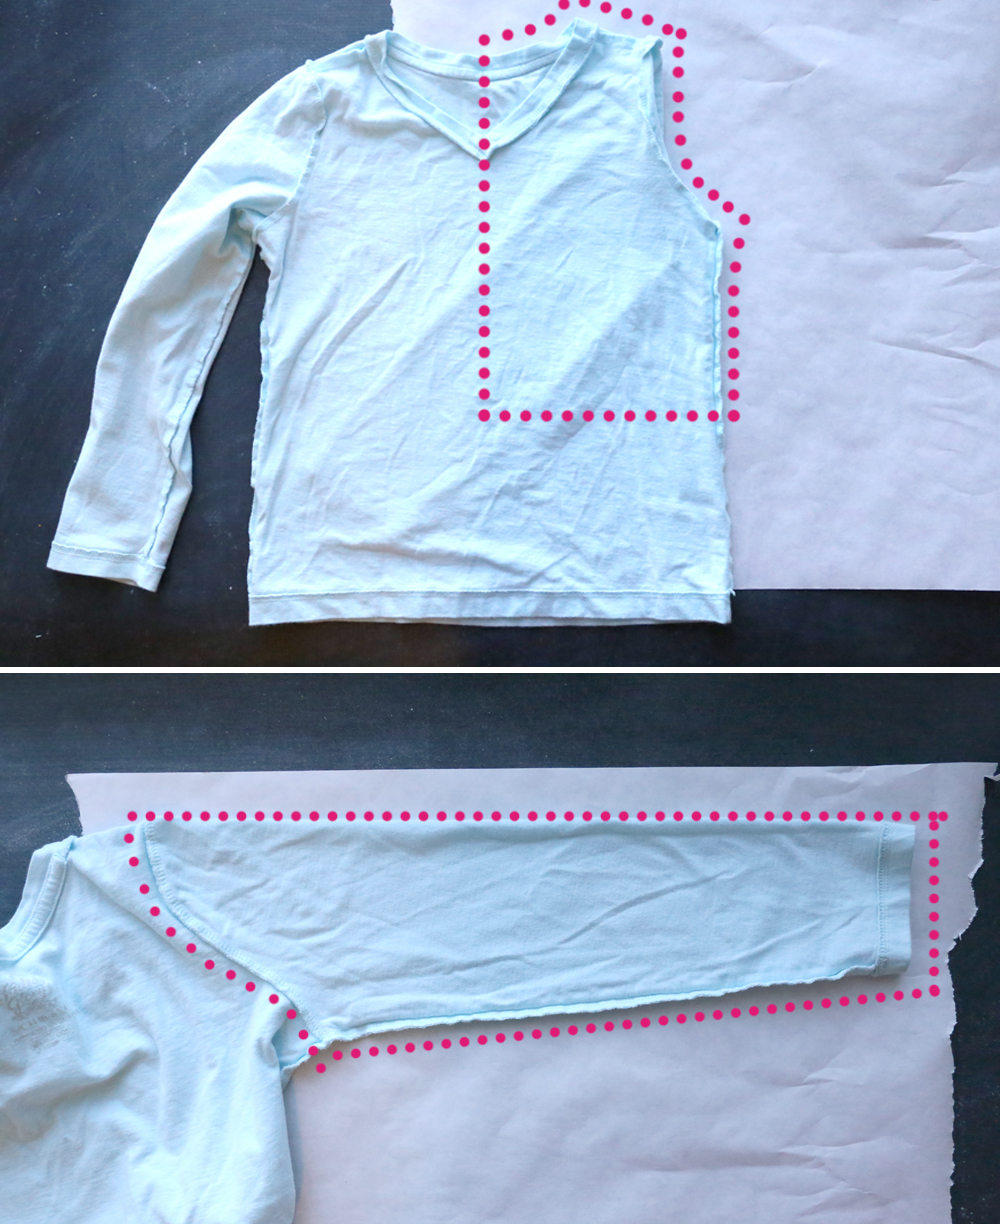 Pattern cutting diagram, using a t-shirt to cut a shirt piece and a sleeve piece